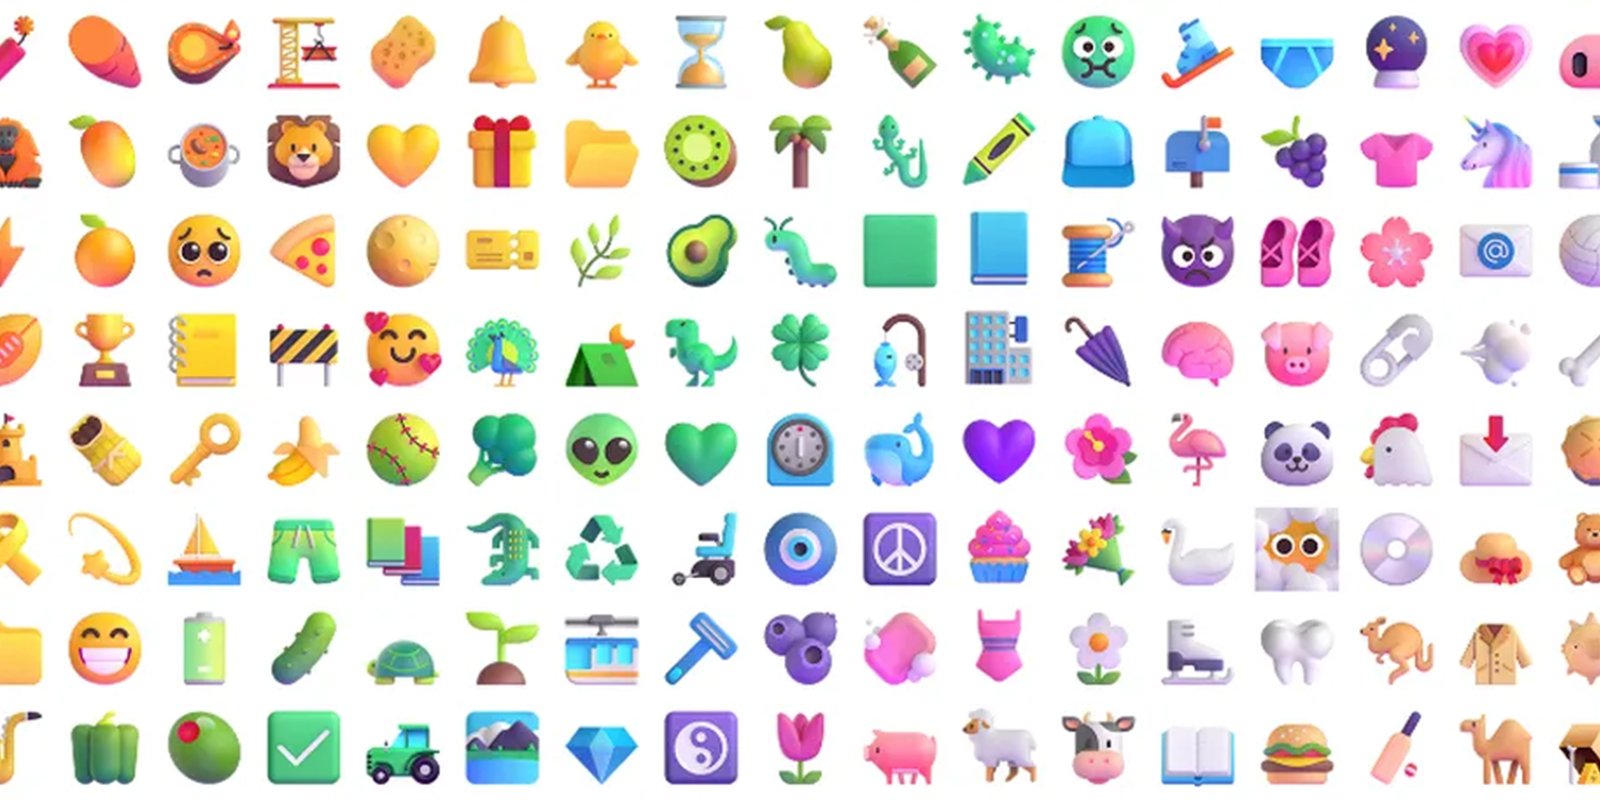 Microsoft Has Unveiled New 3D Emojis For Teams, Office, And Windows